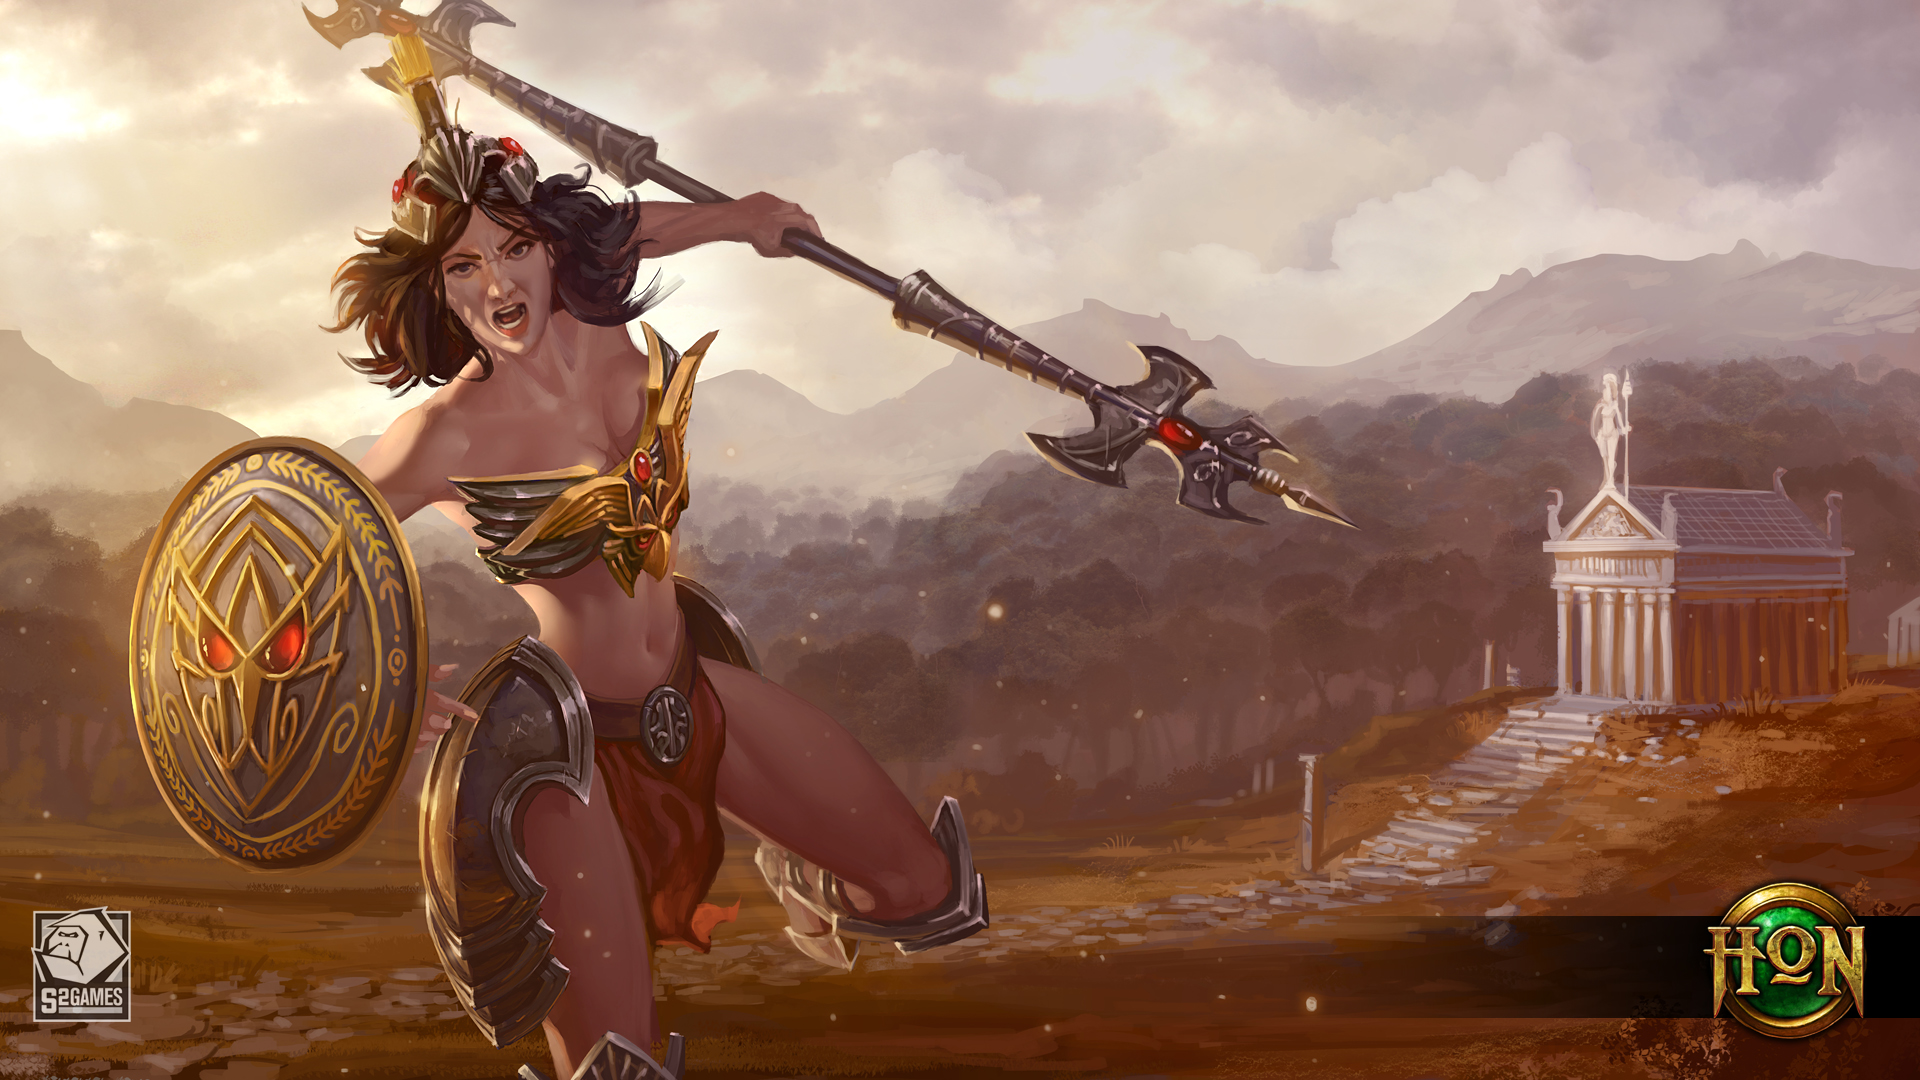 Cool 29 Backgrounds, Top Rated Athena Collection.